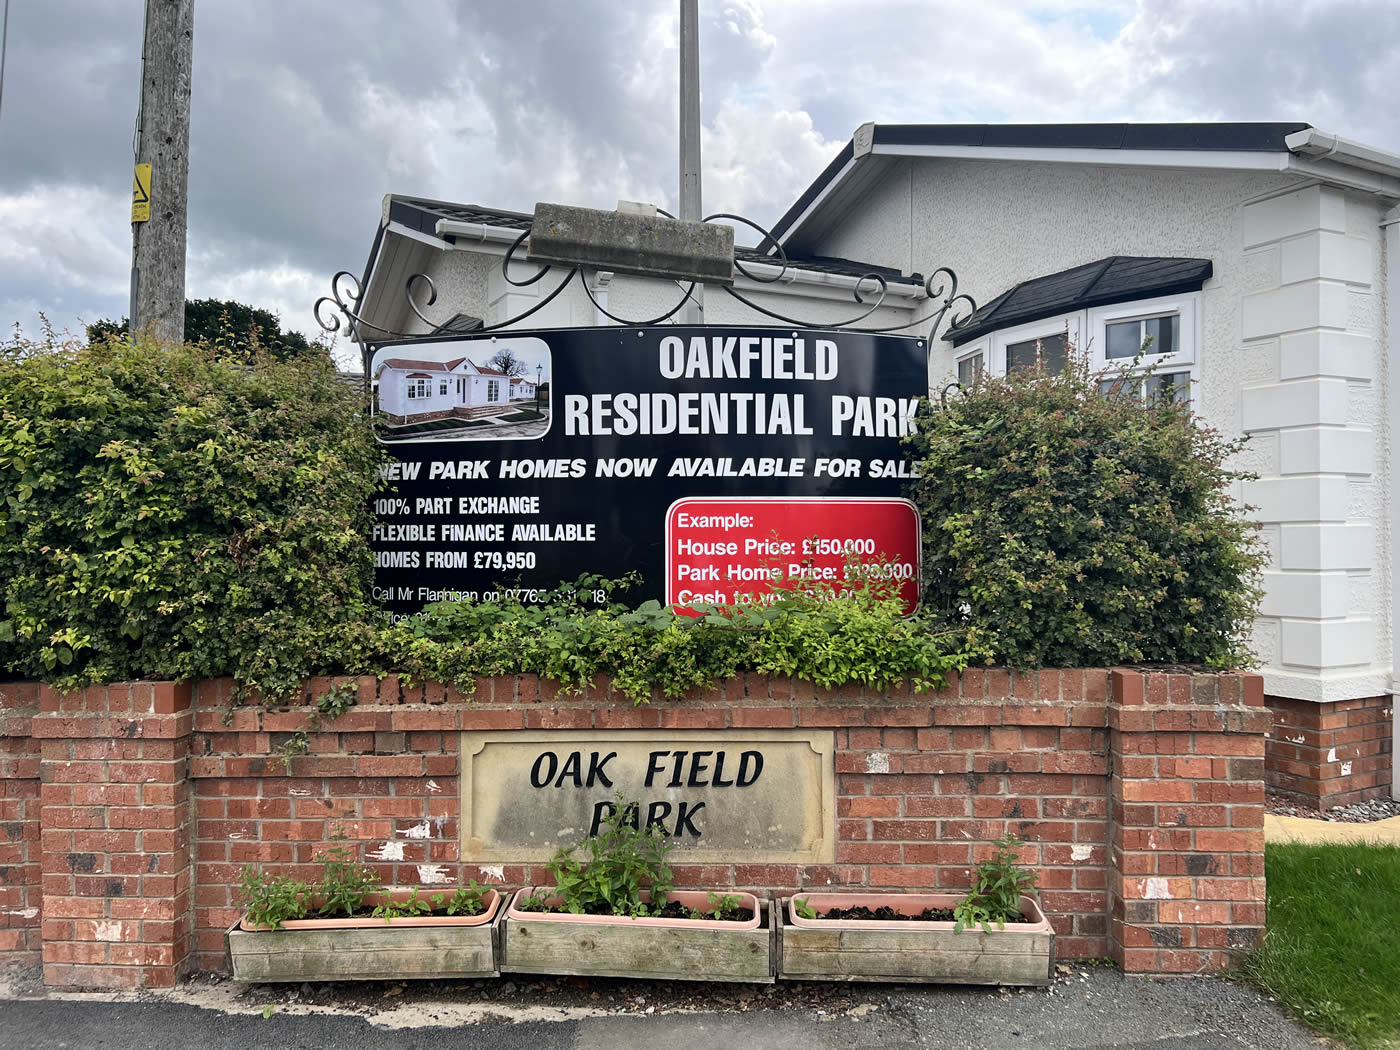 Oakfield Residential Park Wrexham Wales Sign